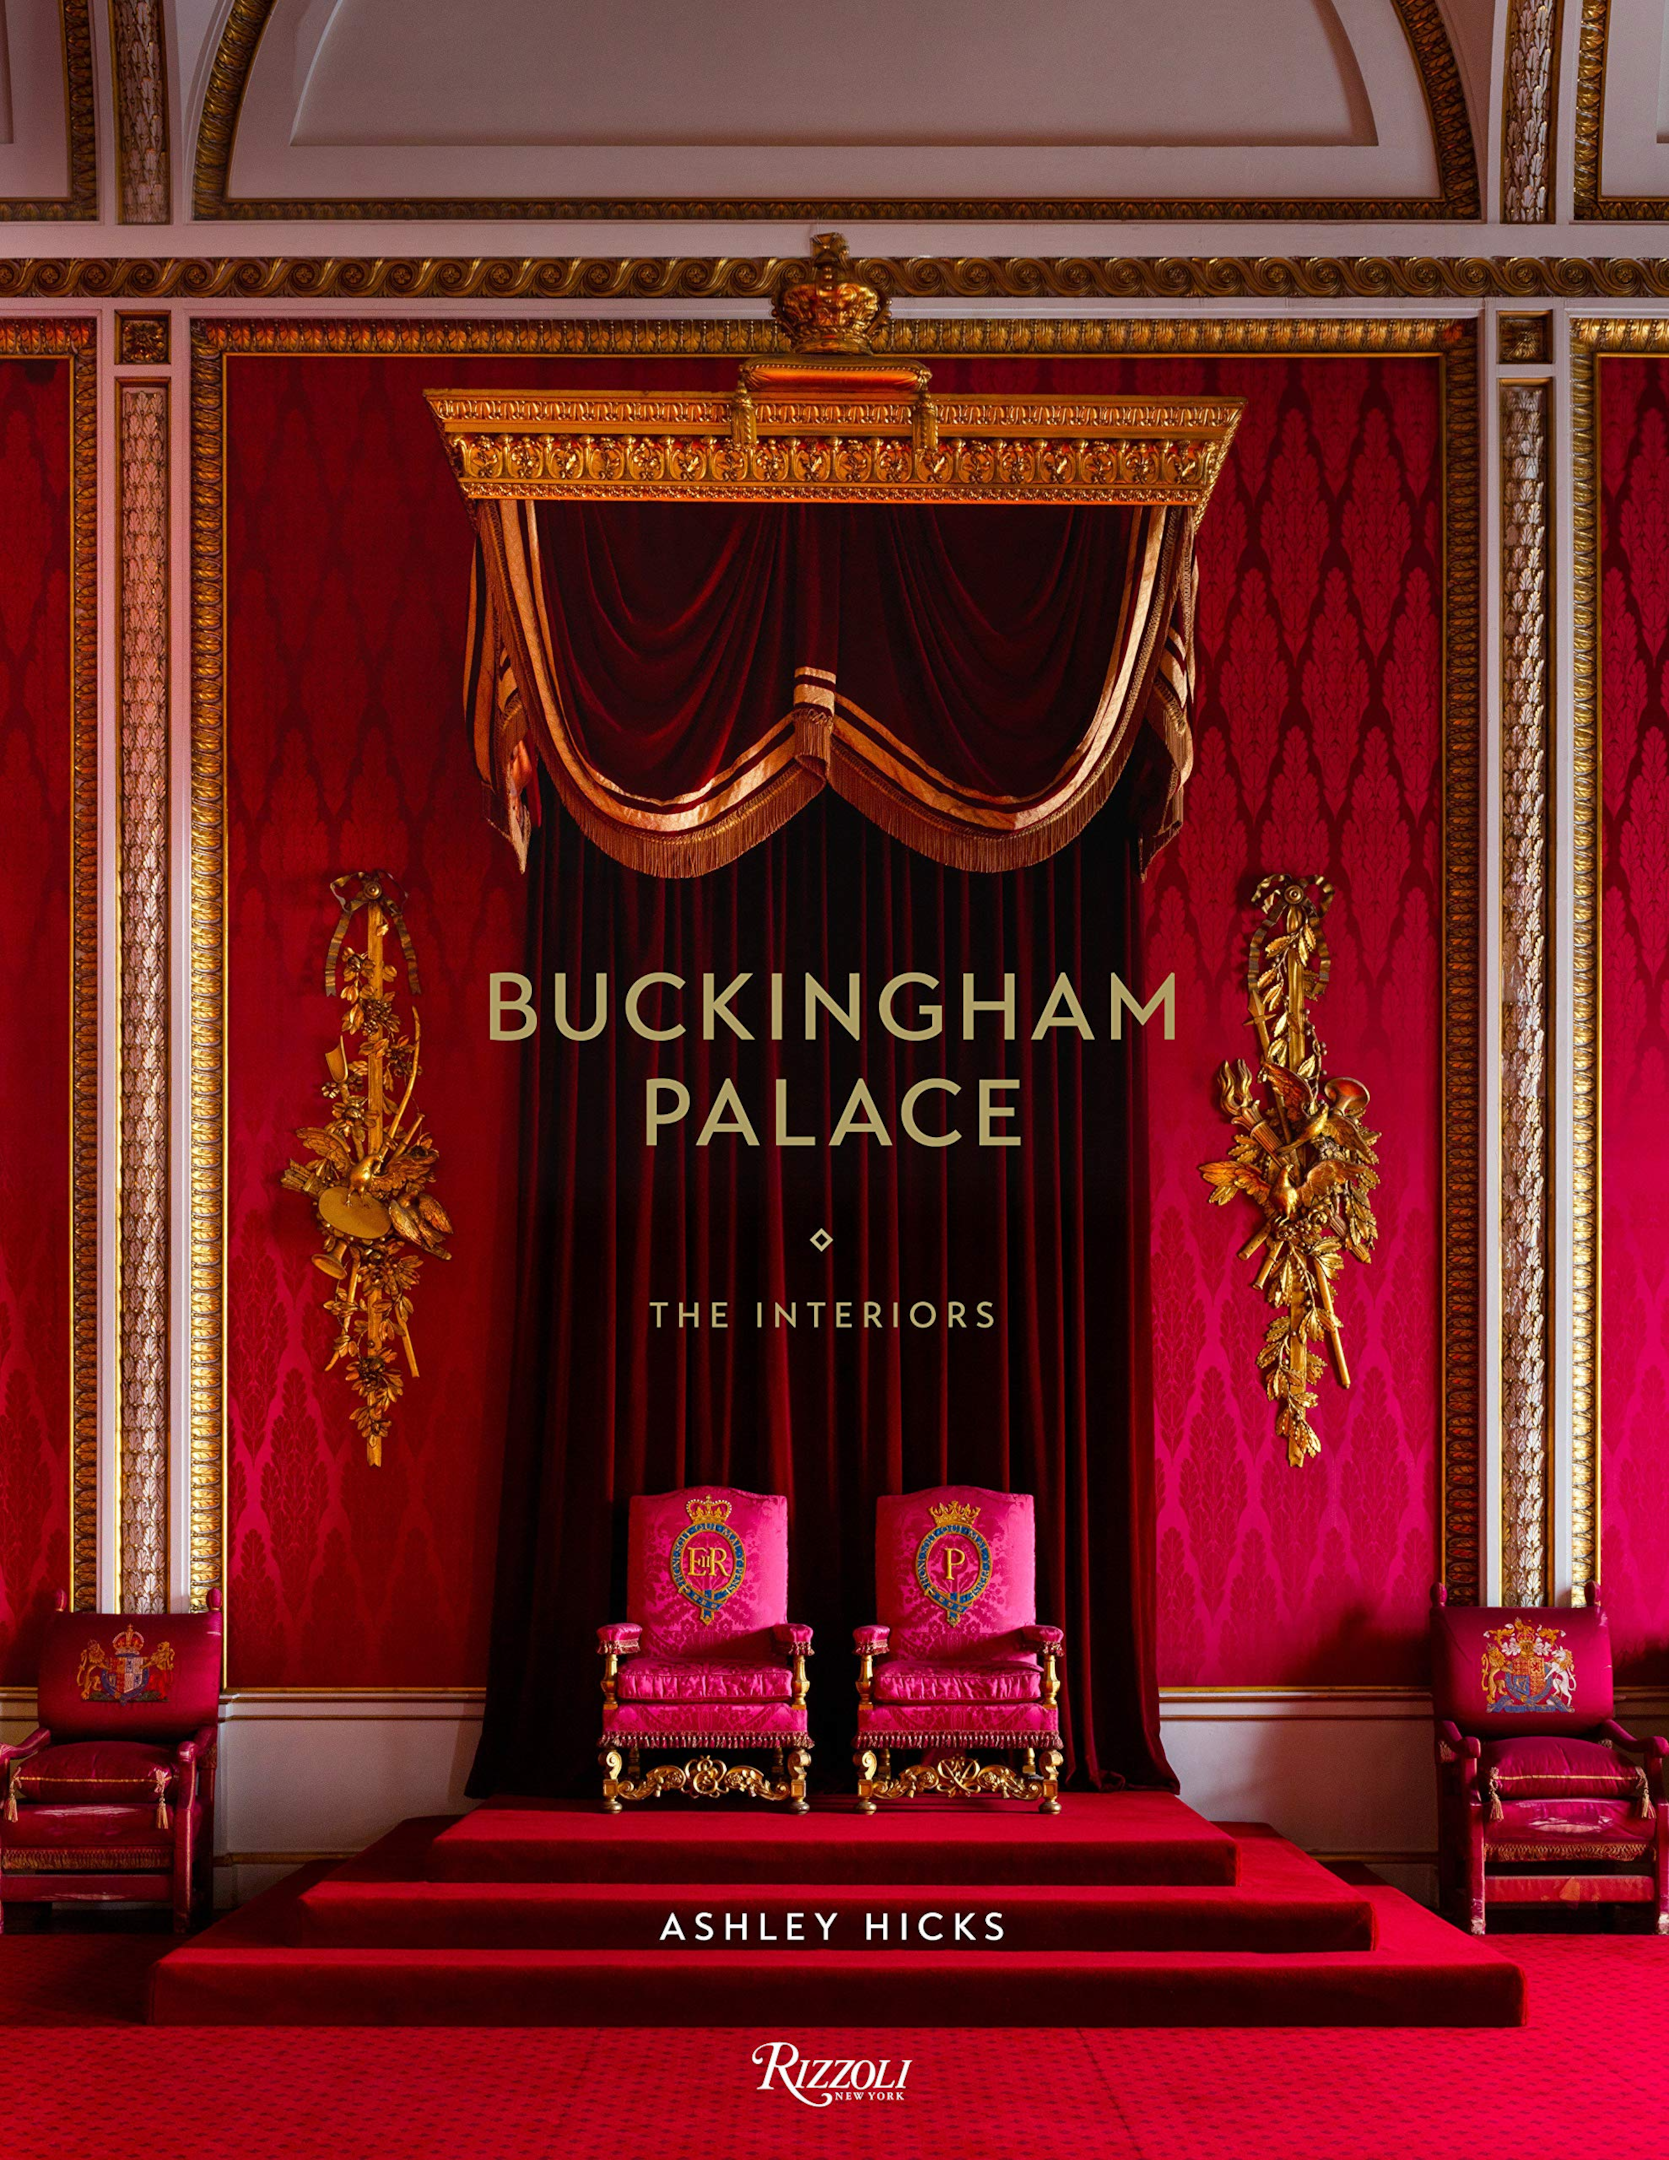 Buckingham Palace & The Interiors | Pieces Of Literature To Have On Your Coffee Table